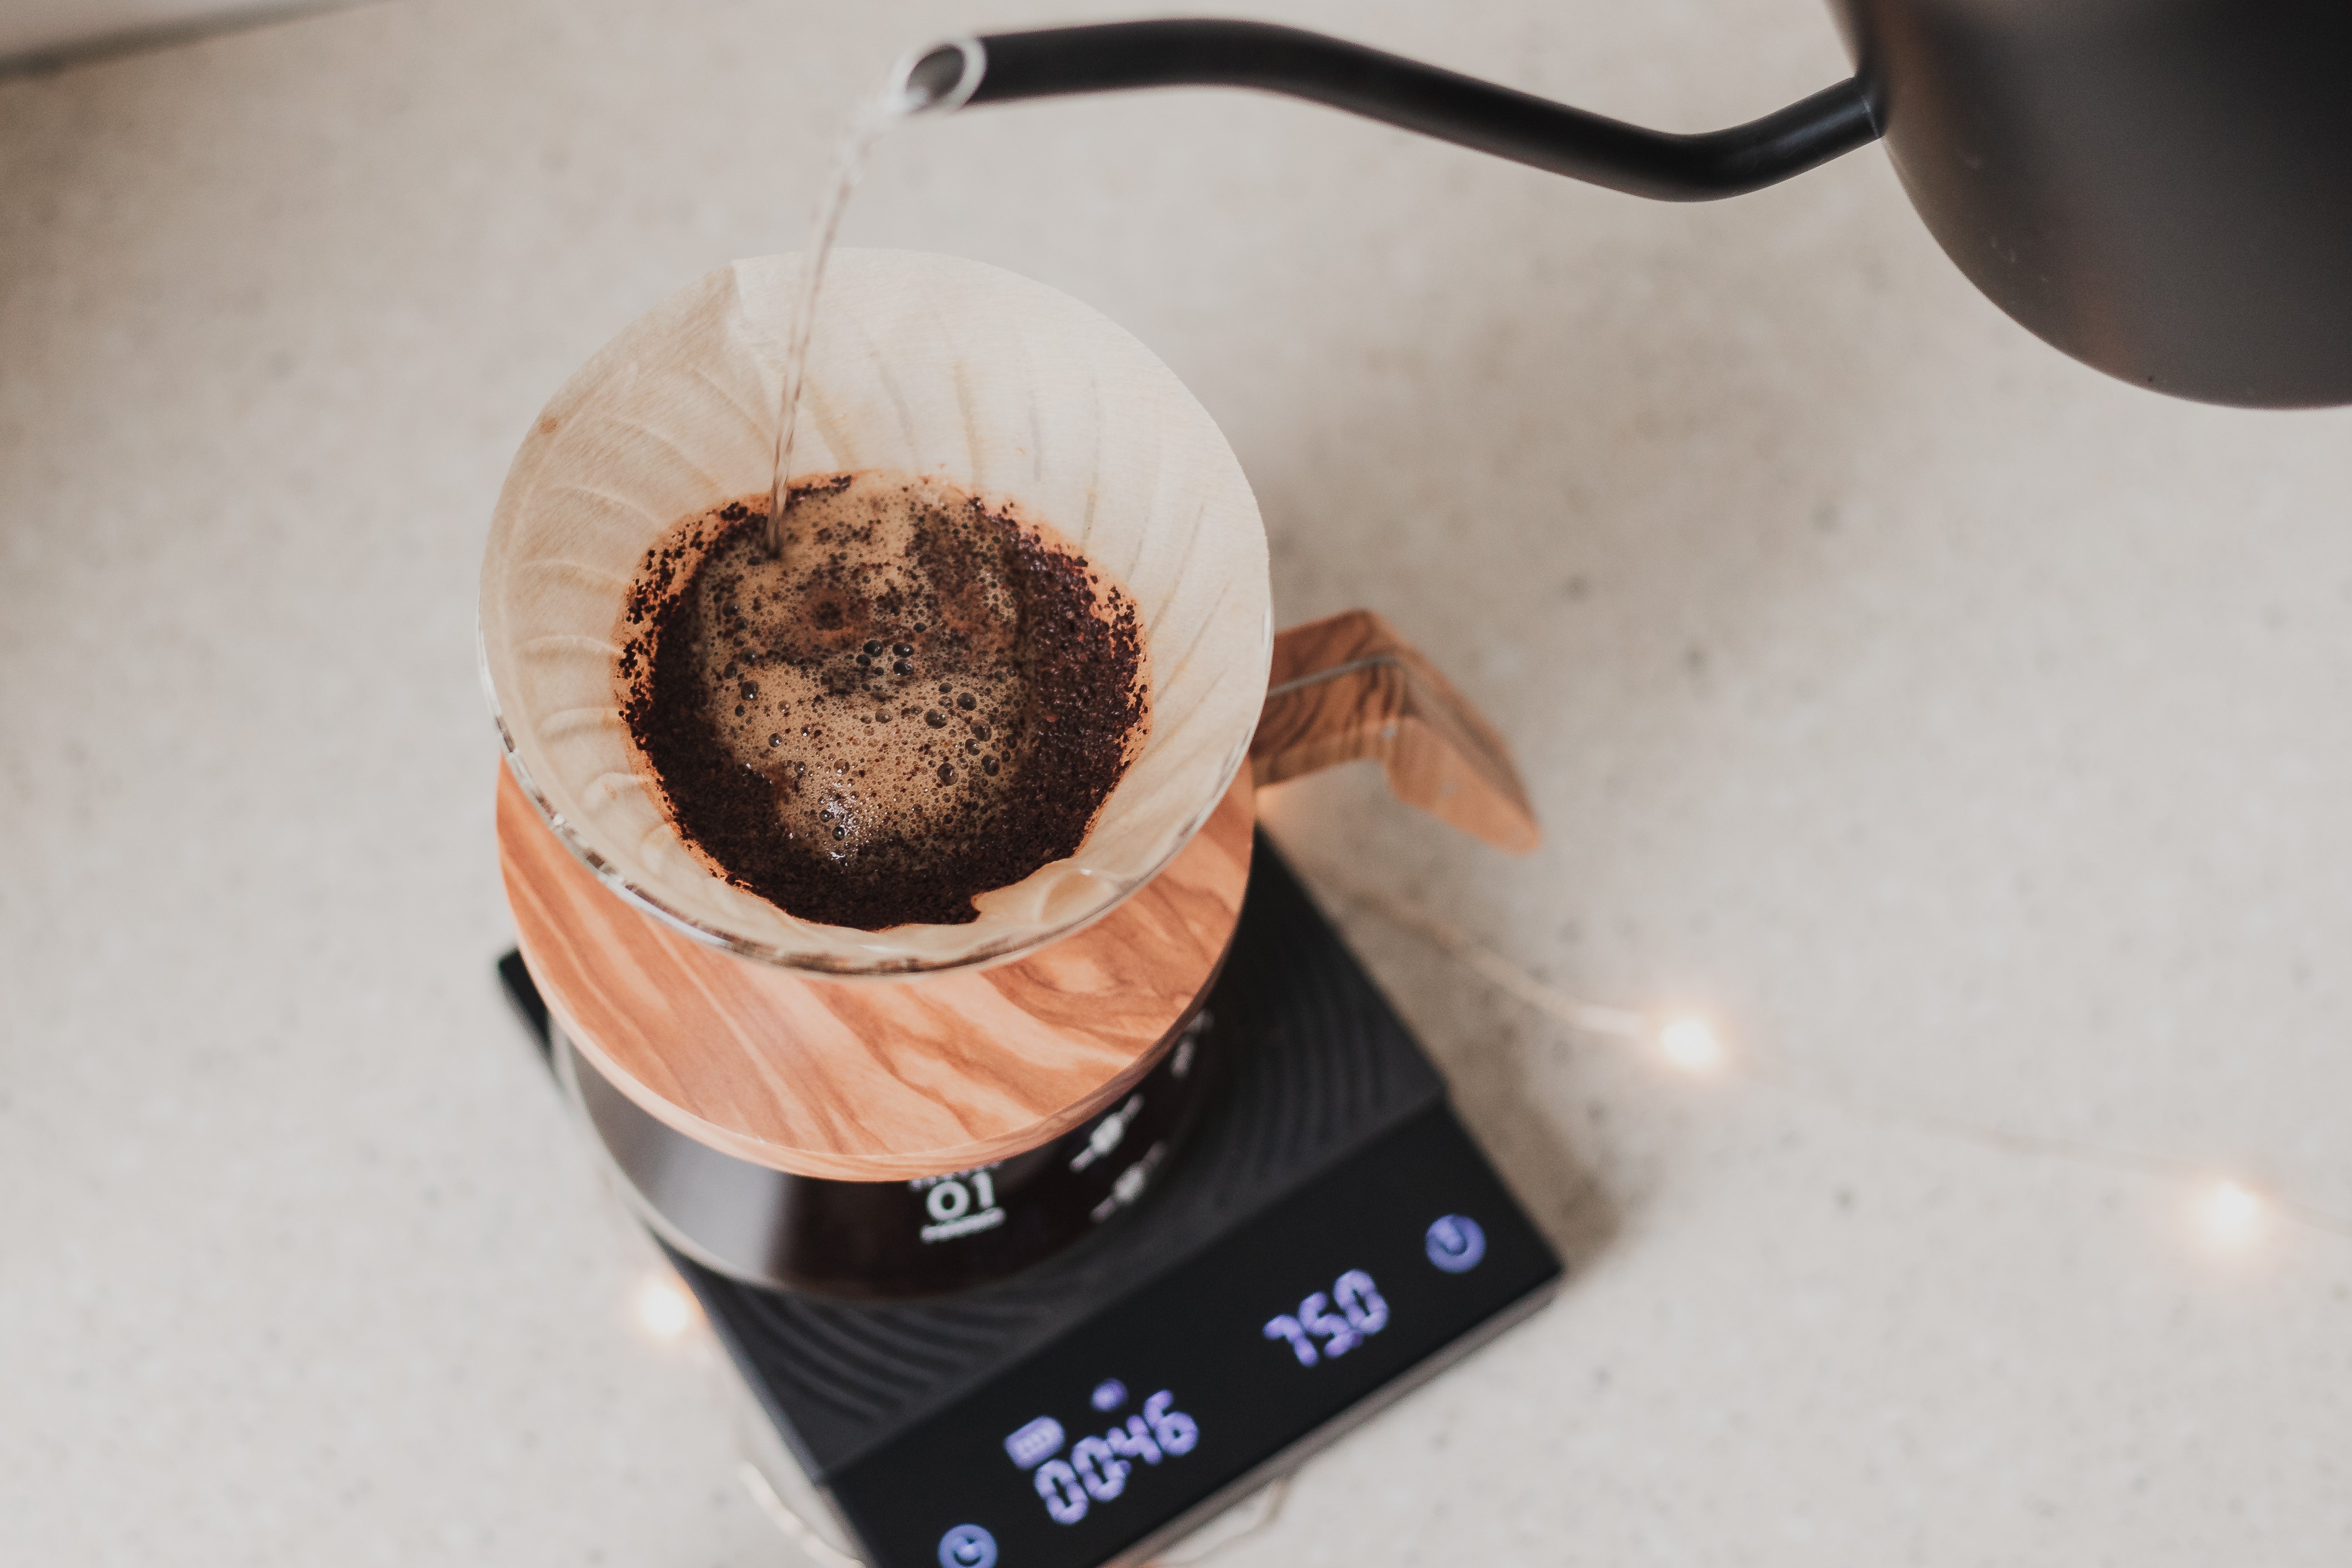 Brewing with the V60